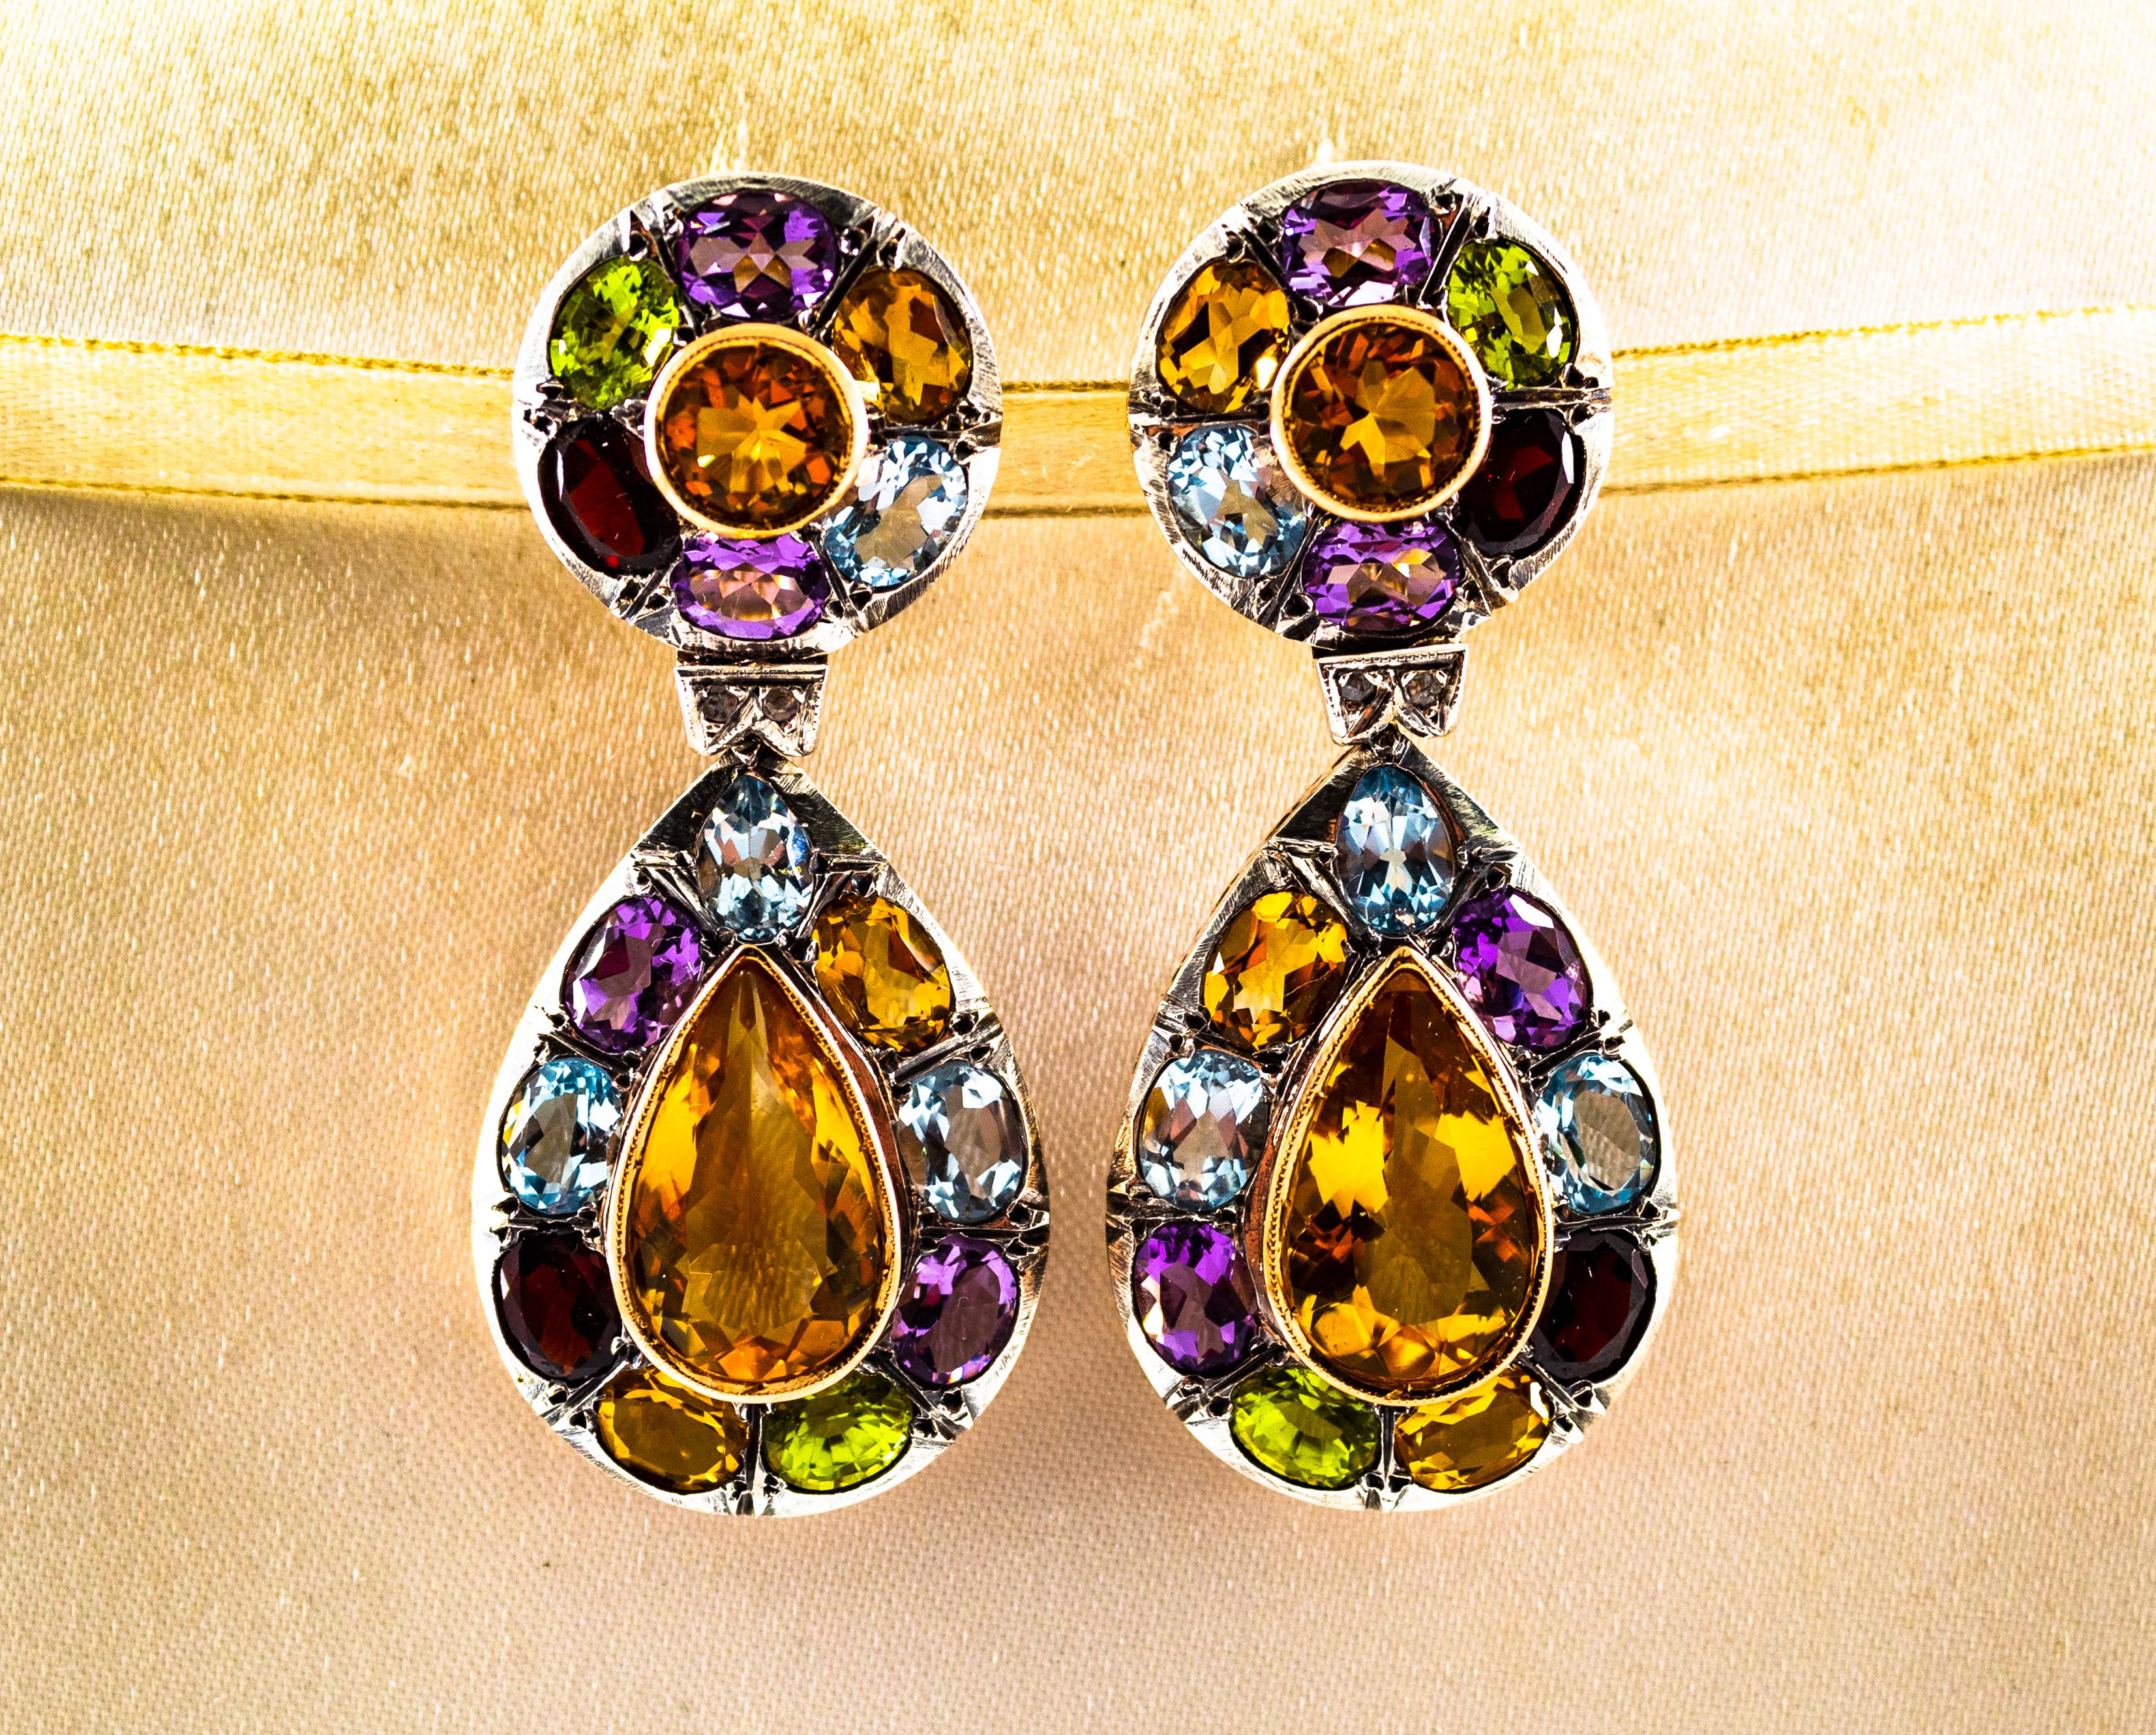 These Earrings are made of 9K Yellow Gold and Sterling Silver.
These Earrings have 0.05 Carats of White Rose Cut Diamonds.
These Earrings have also Blue Topaz, Amethyst, Citrine, Garnet and Peridot.

All our Earrings have pins for pierced ears but